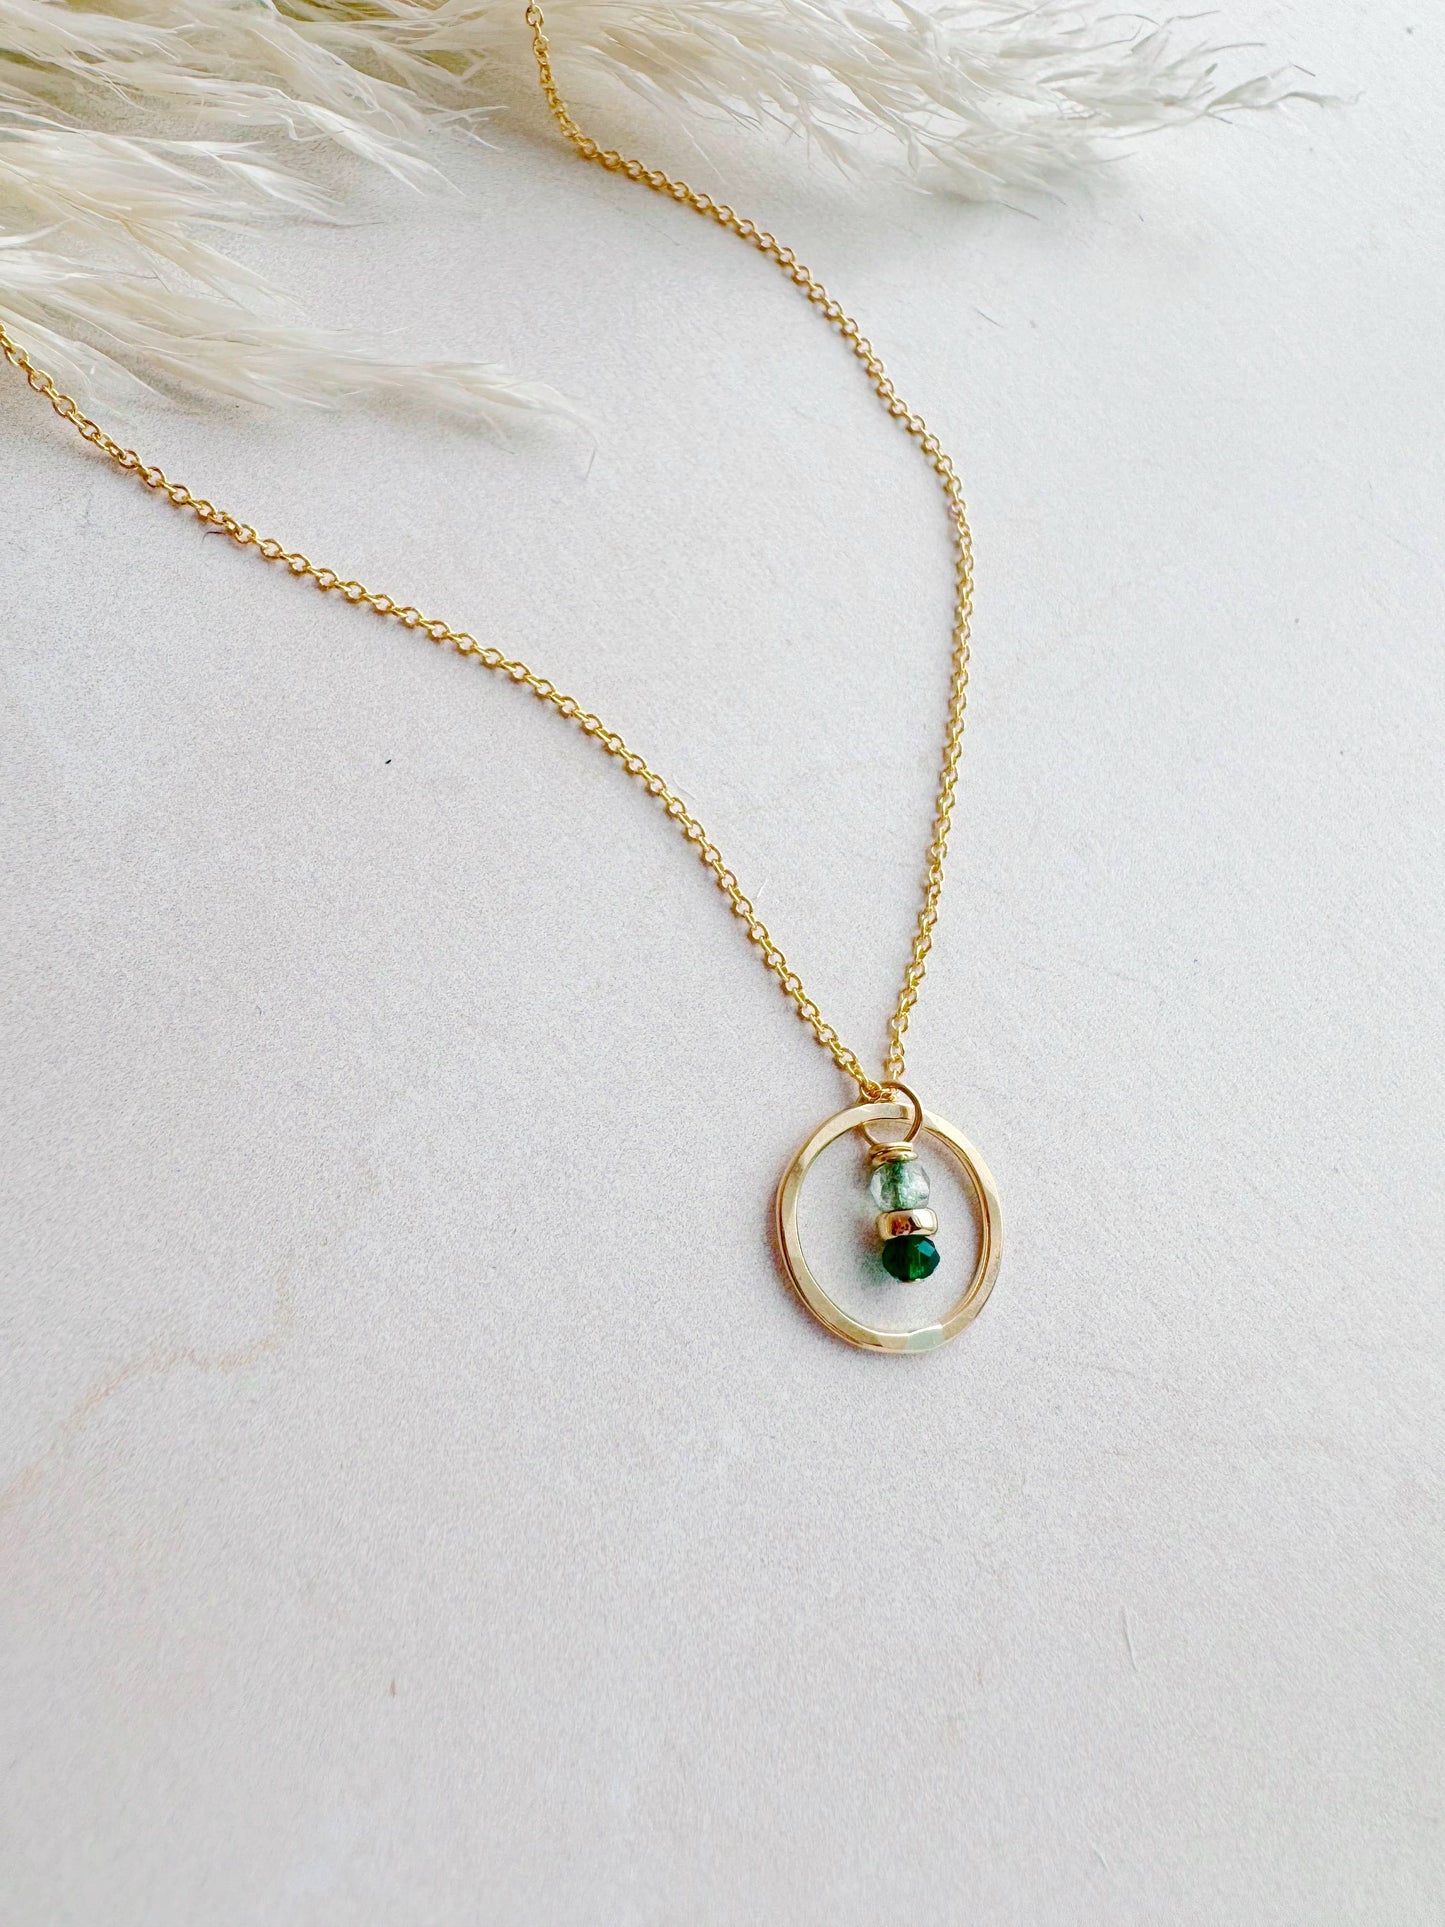 Seedling Tiny Gold Circle Necklace with Green Crystals